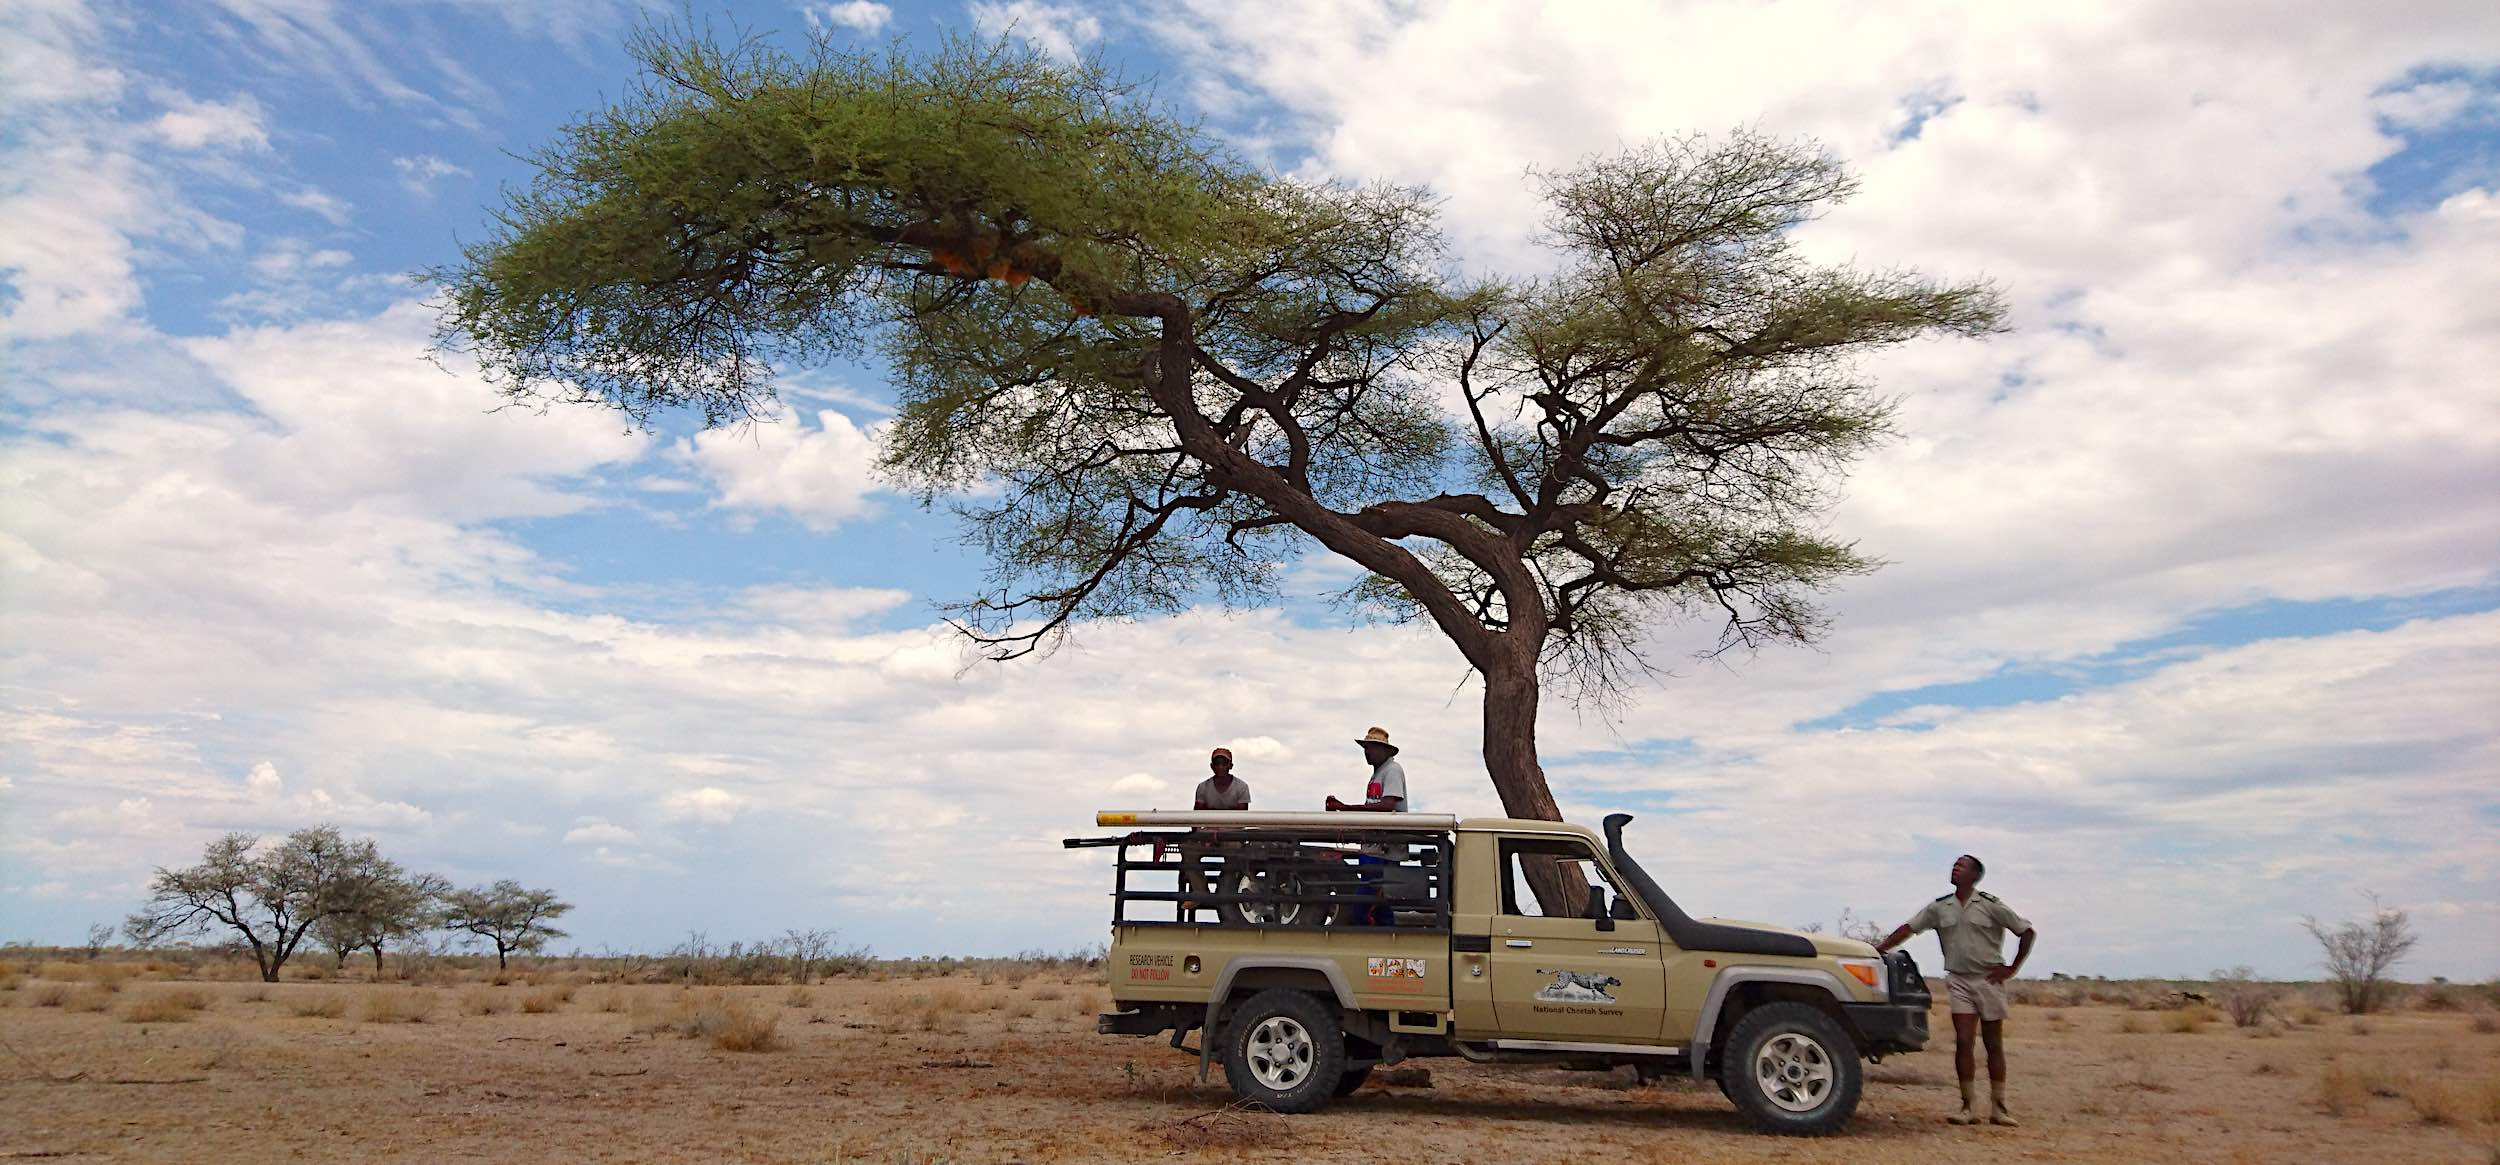 Three men and a Toyota Landcruiser parked under a large tree in an otherwise desertlike environment.